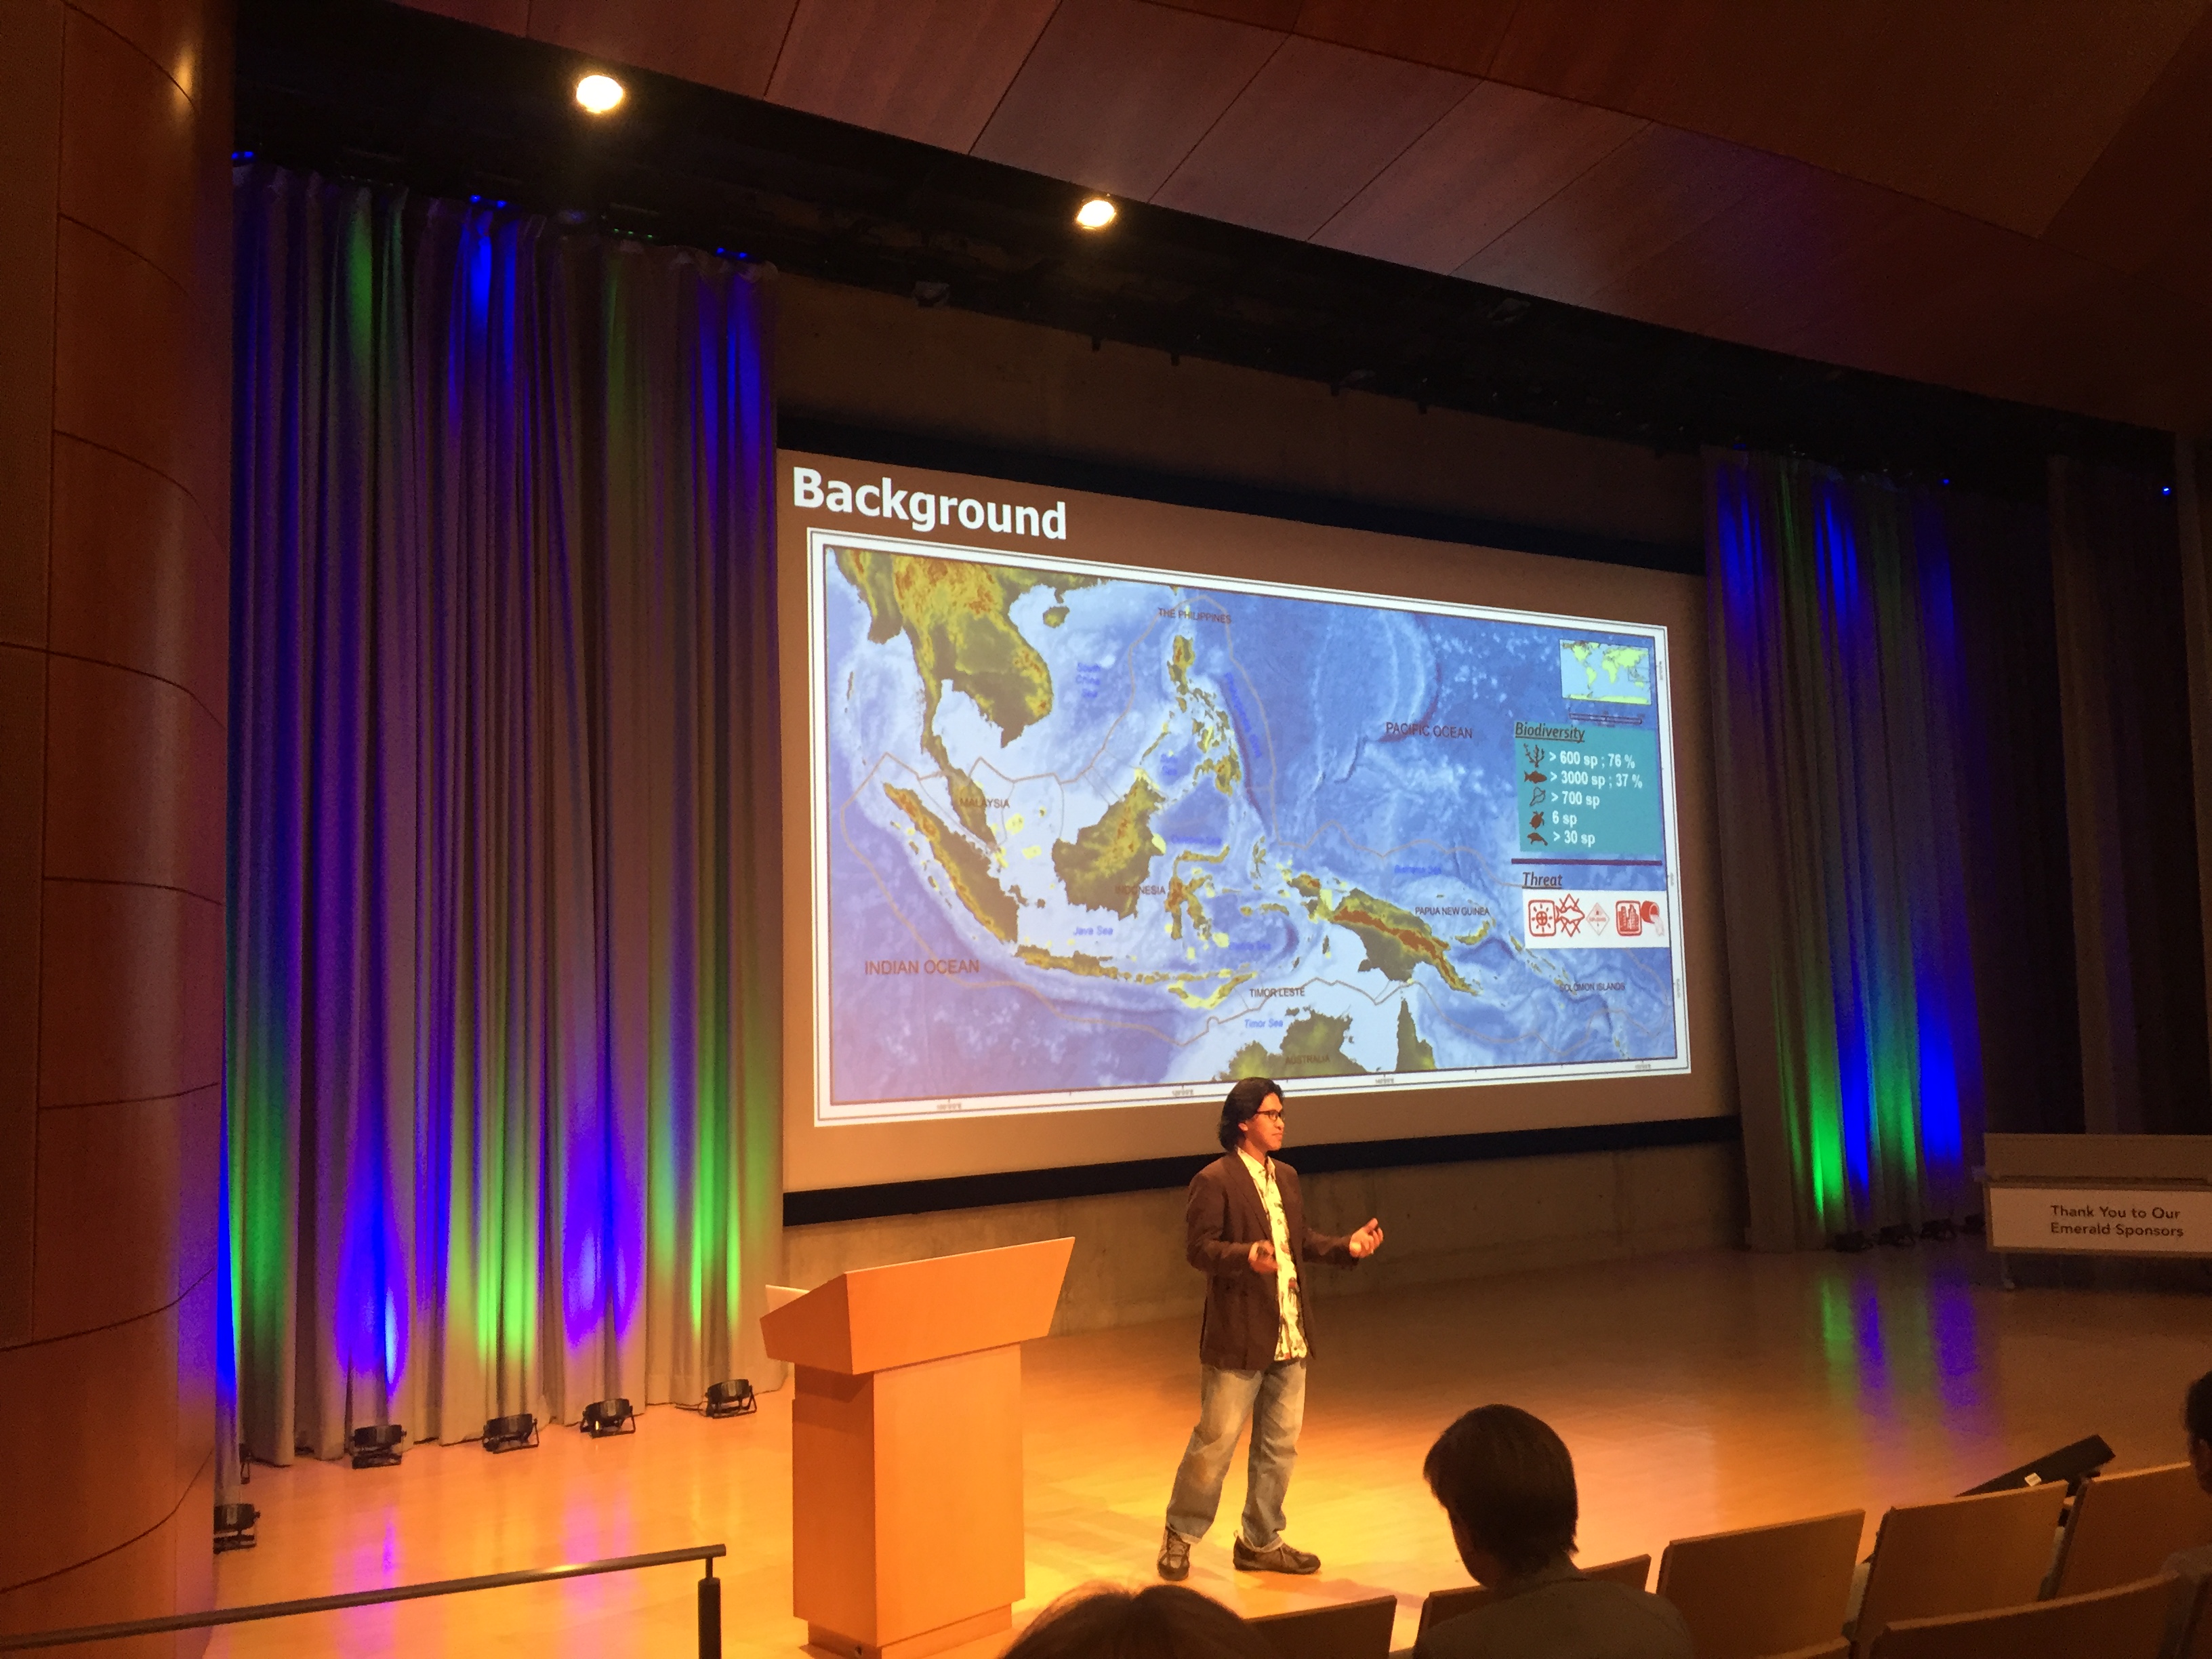 Irawan Asaad presenting on "Priority Areas for Marine Biodiversity Conservation in the Coral Triangle" at the 2017 Esri Ocean Forum.